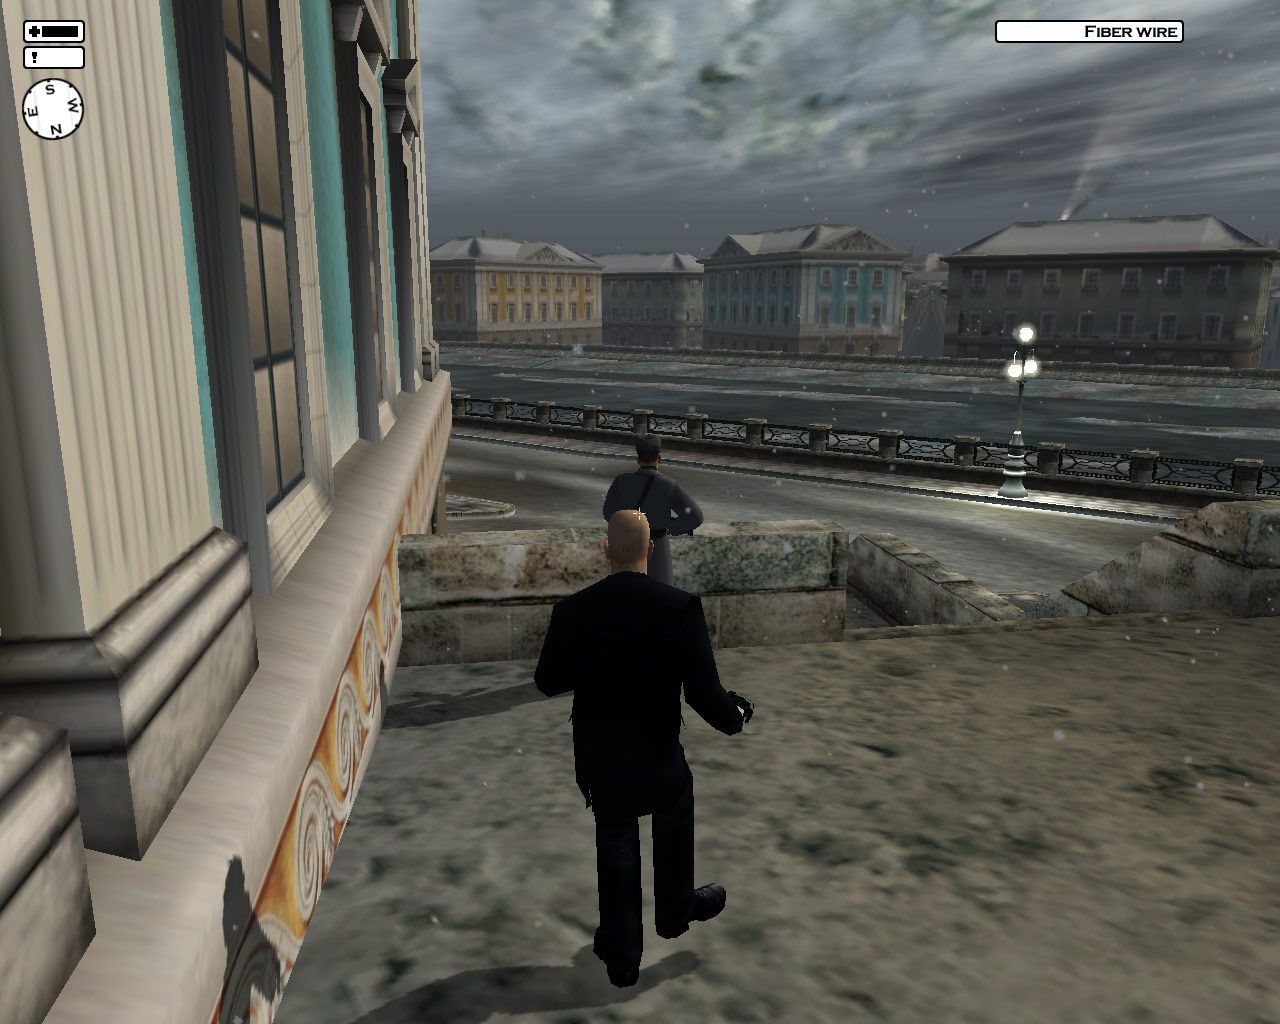 Hitman 2 Silent Assassin Compressed PC Game Free Download 181MB